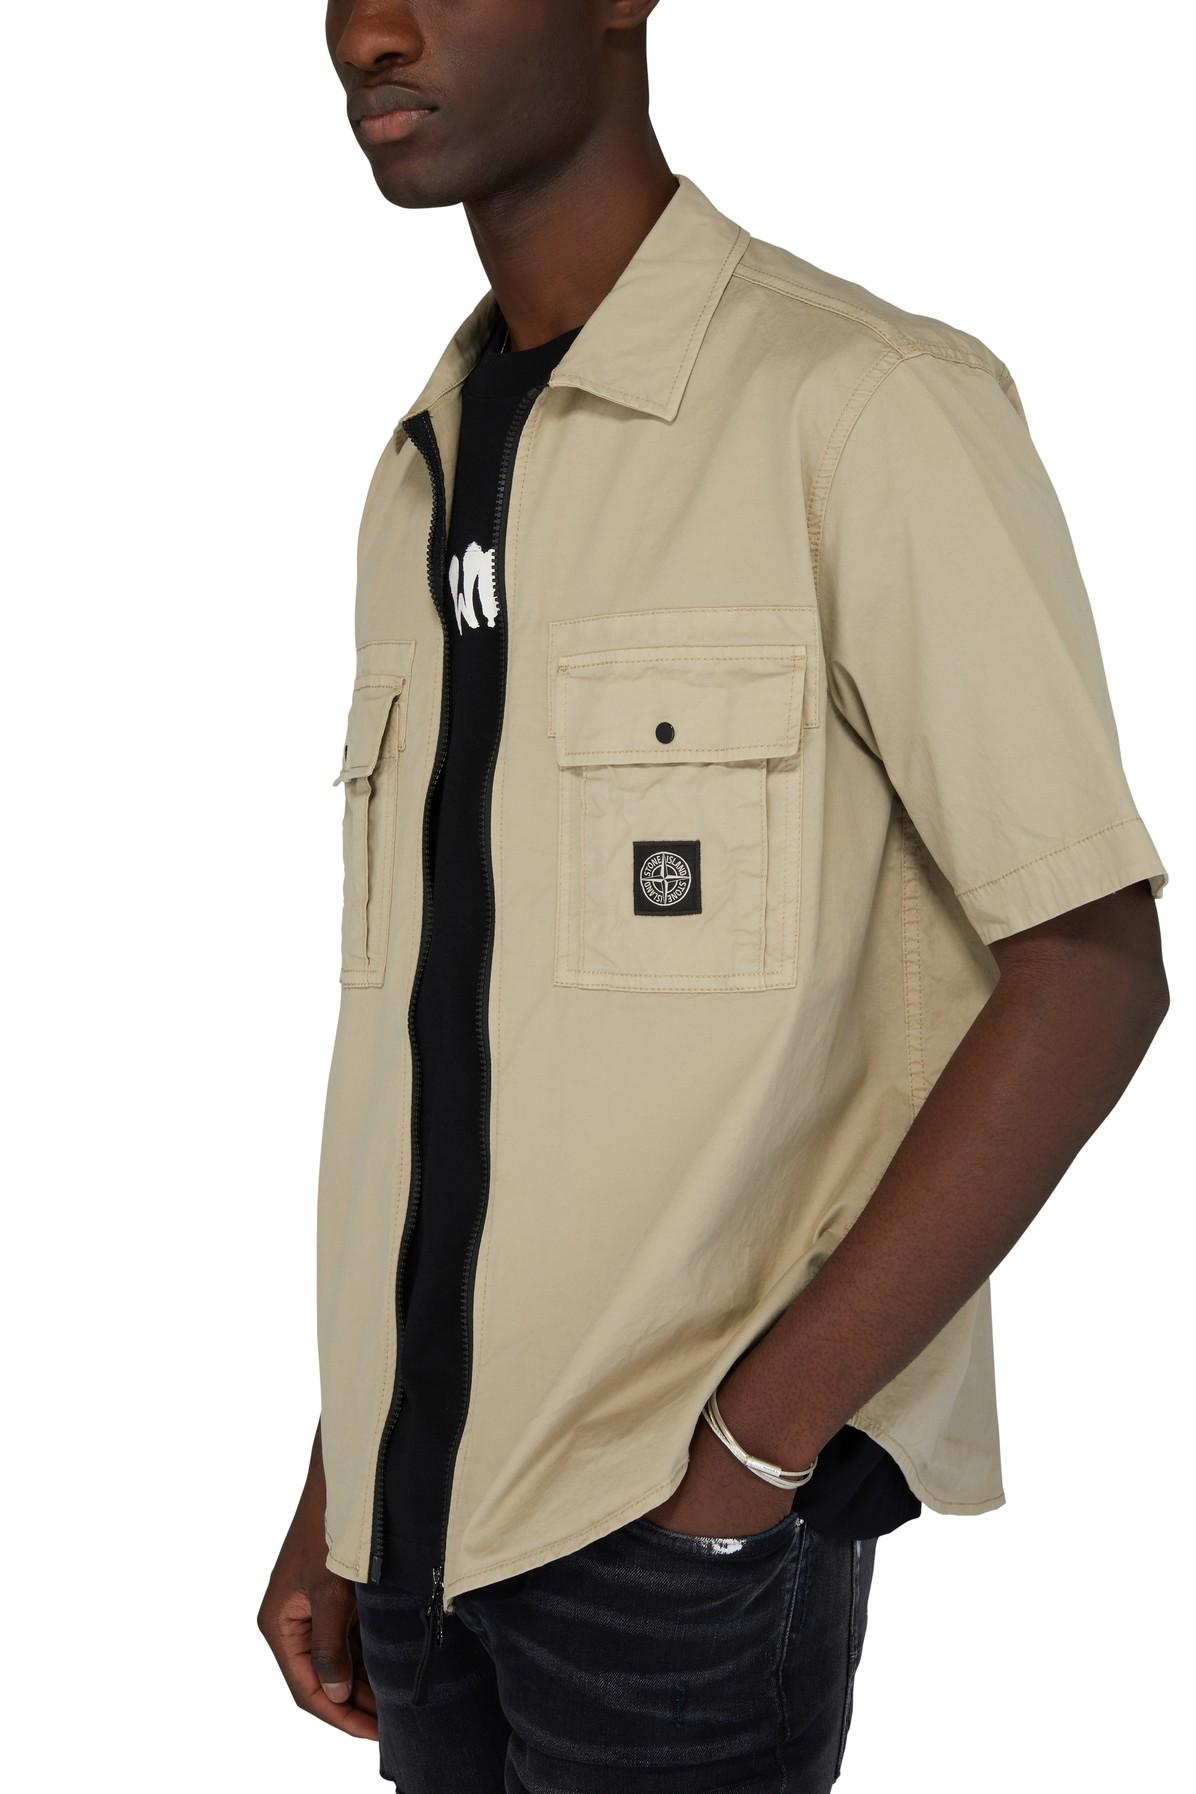 Stone Island Short Sleeves Overshirt in Beige (Natural) for Men | Lyst